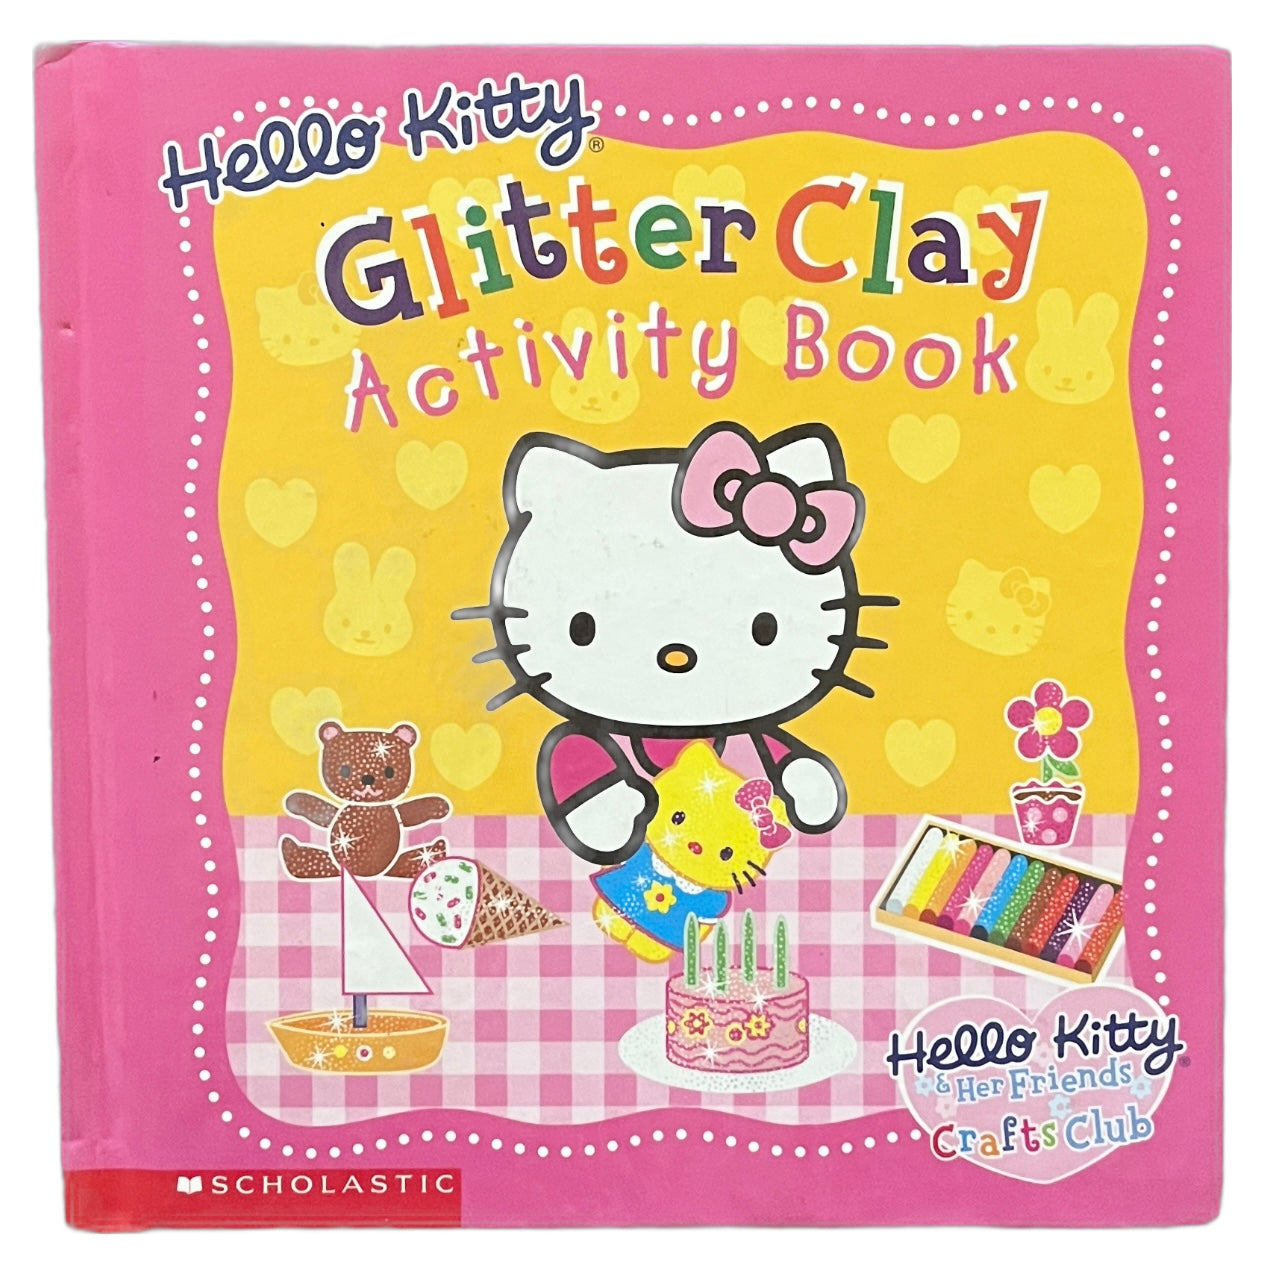 Hello Kitty beads activity book (Hello Kitty & her friends crafts club)